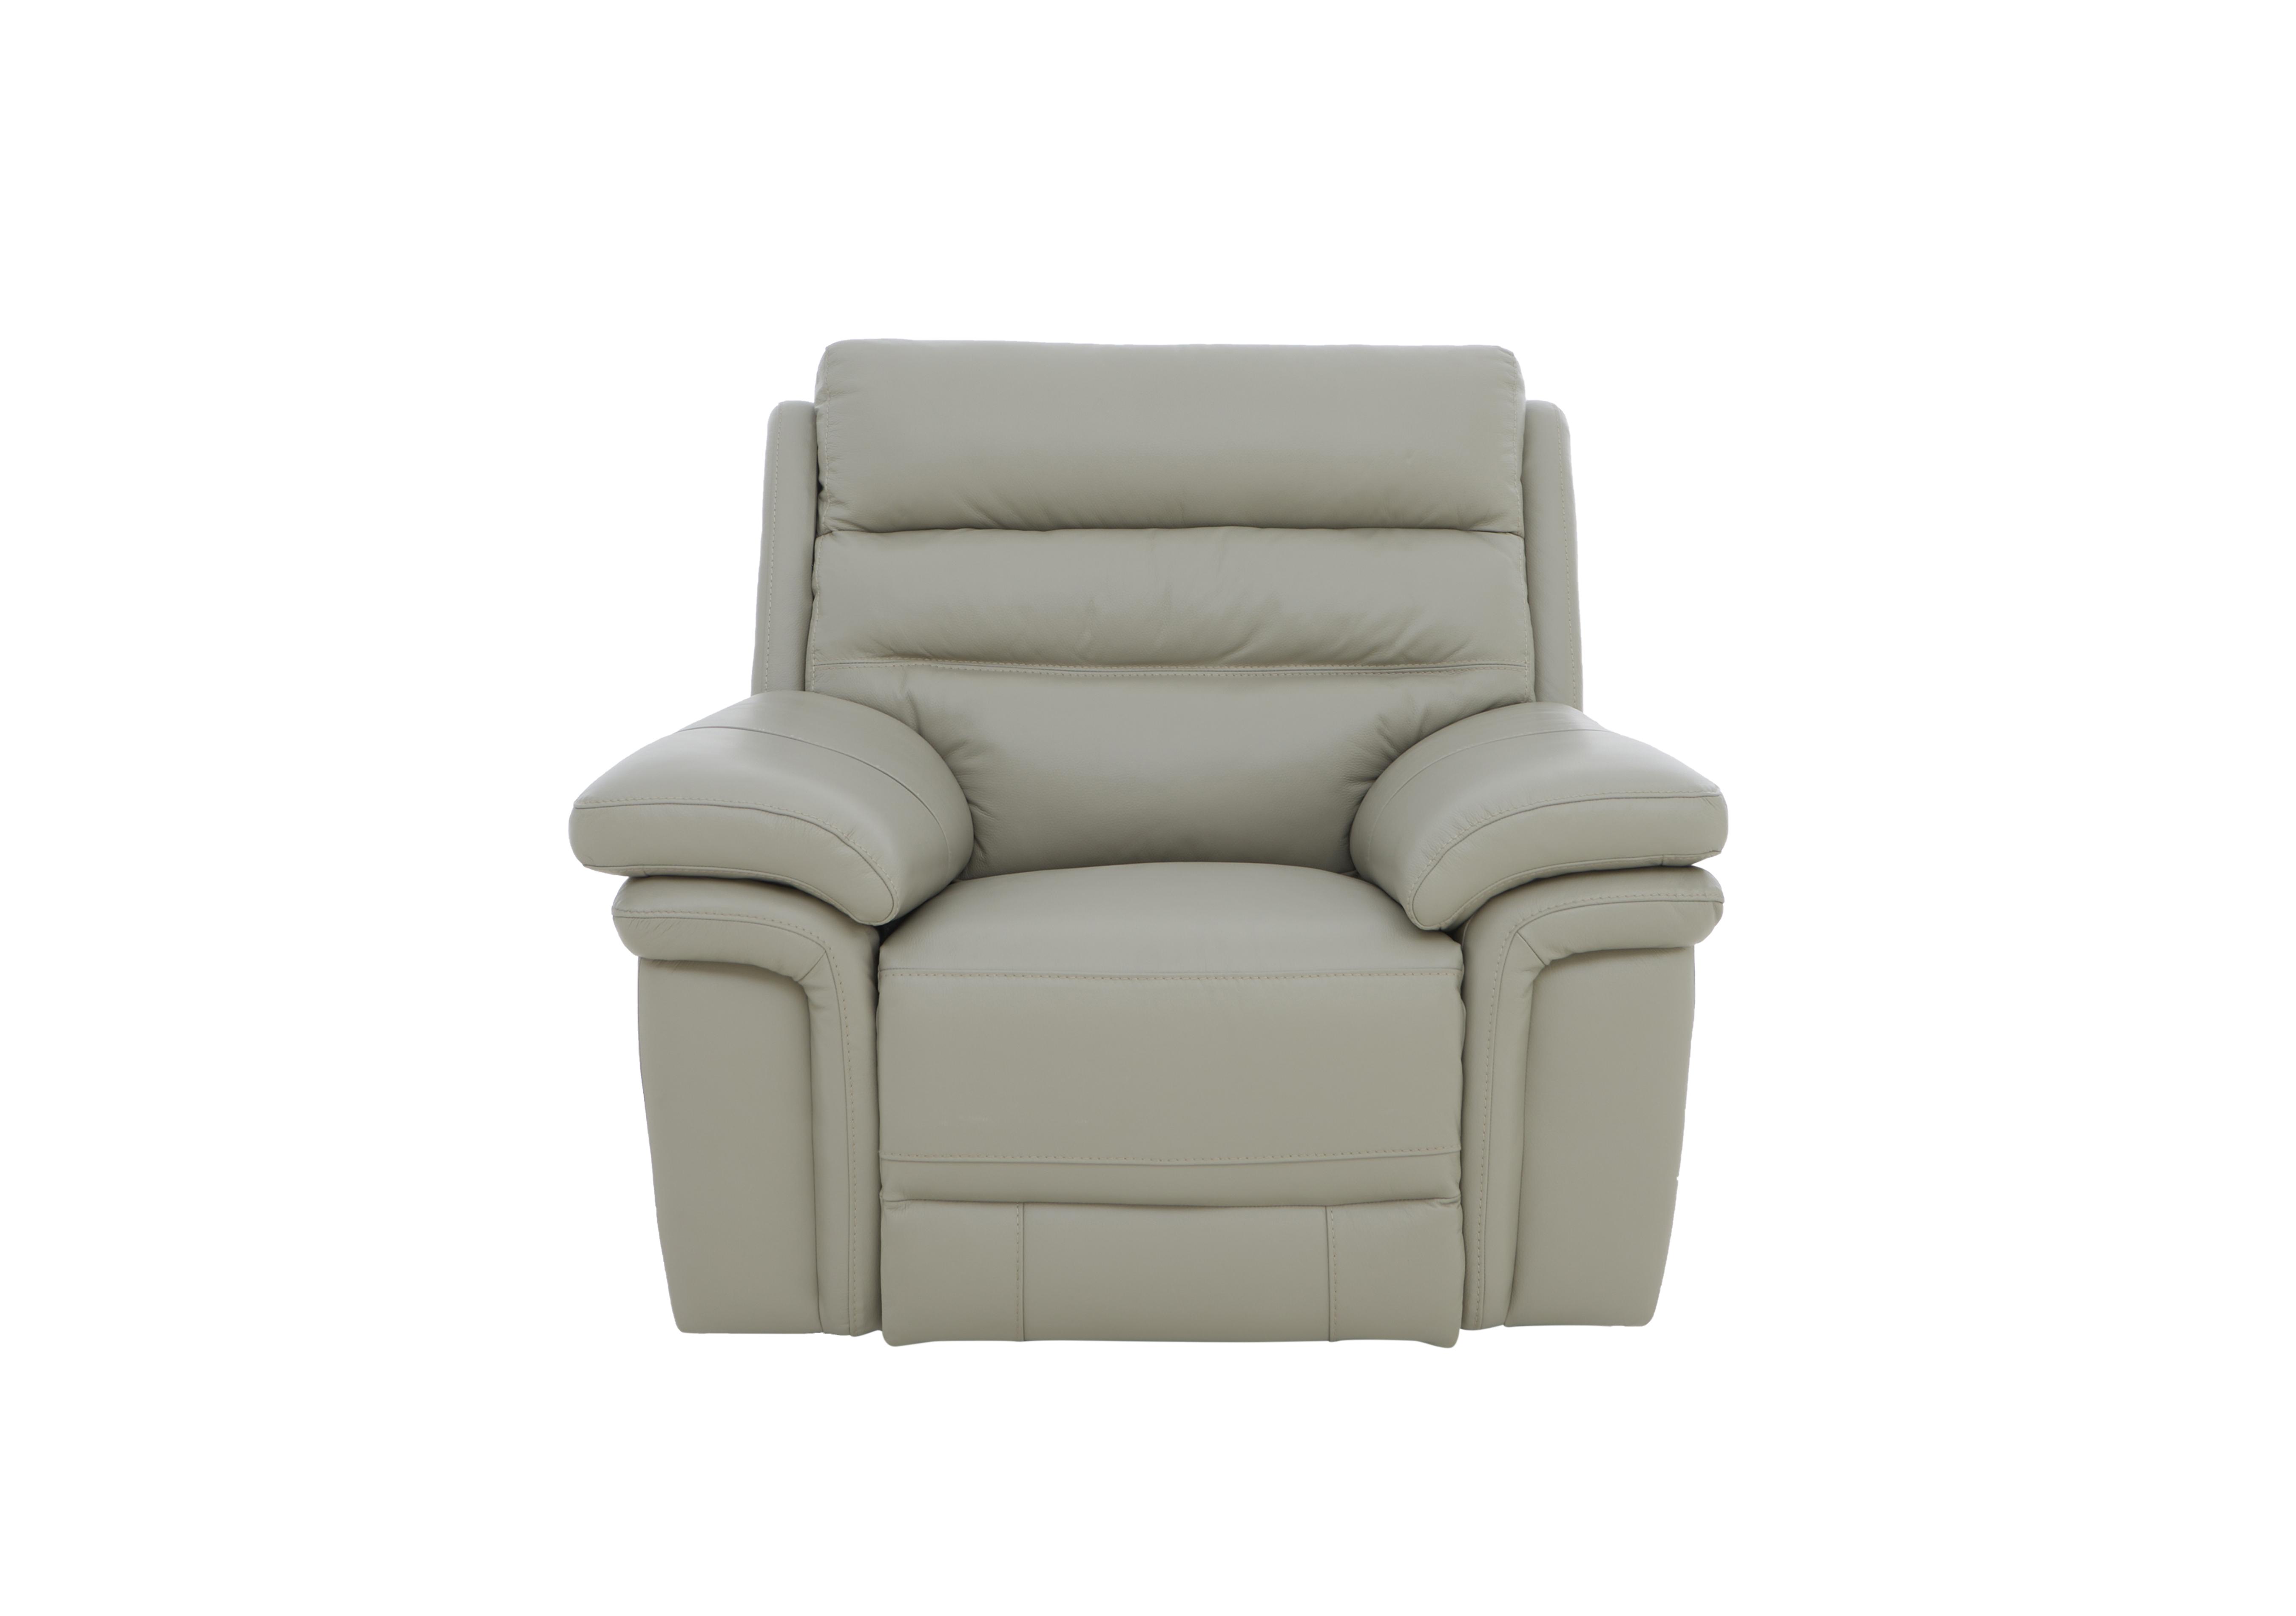 Berlin Leather Chair in Sand Le-9303 on Furniture Village